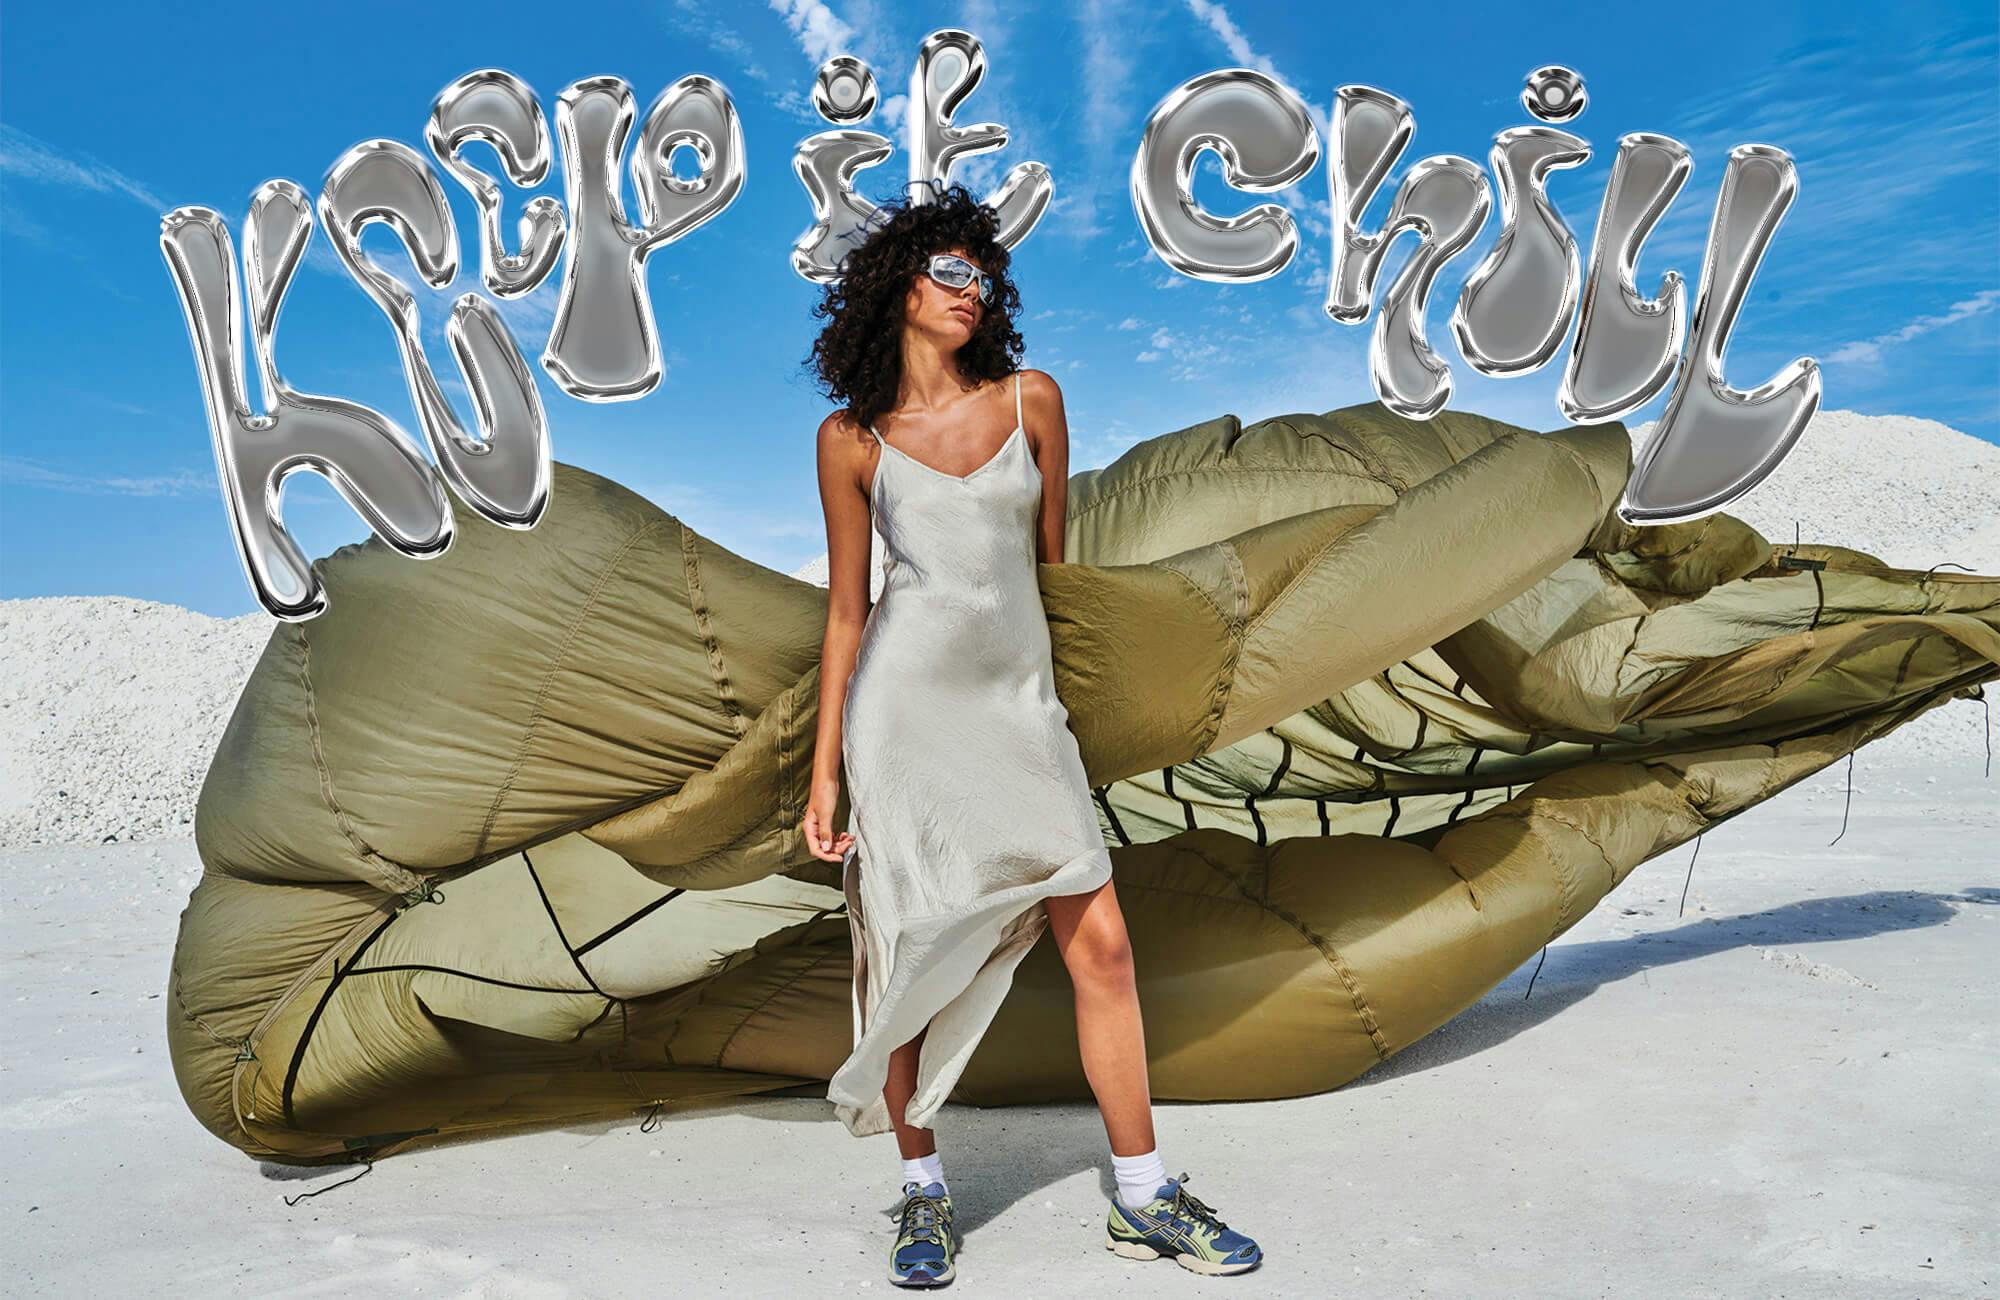 Image of female model standing on white sand, she is holding an army green parachute behind her that blows in the wind, with blue skies. She is wearing sneakers and a silver slip midi dress with silver space sunglasses. Text with 3D silver effect is positioned at the top, reading "keep it chill"